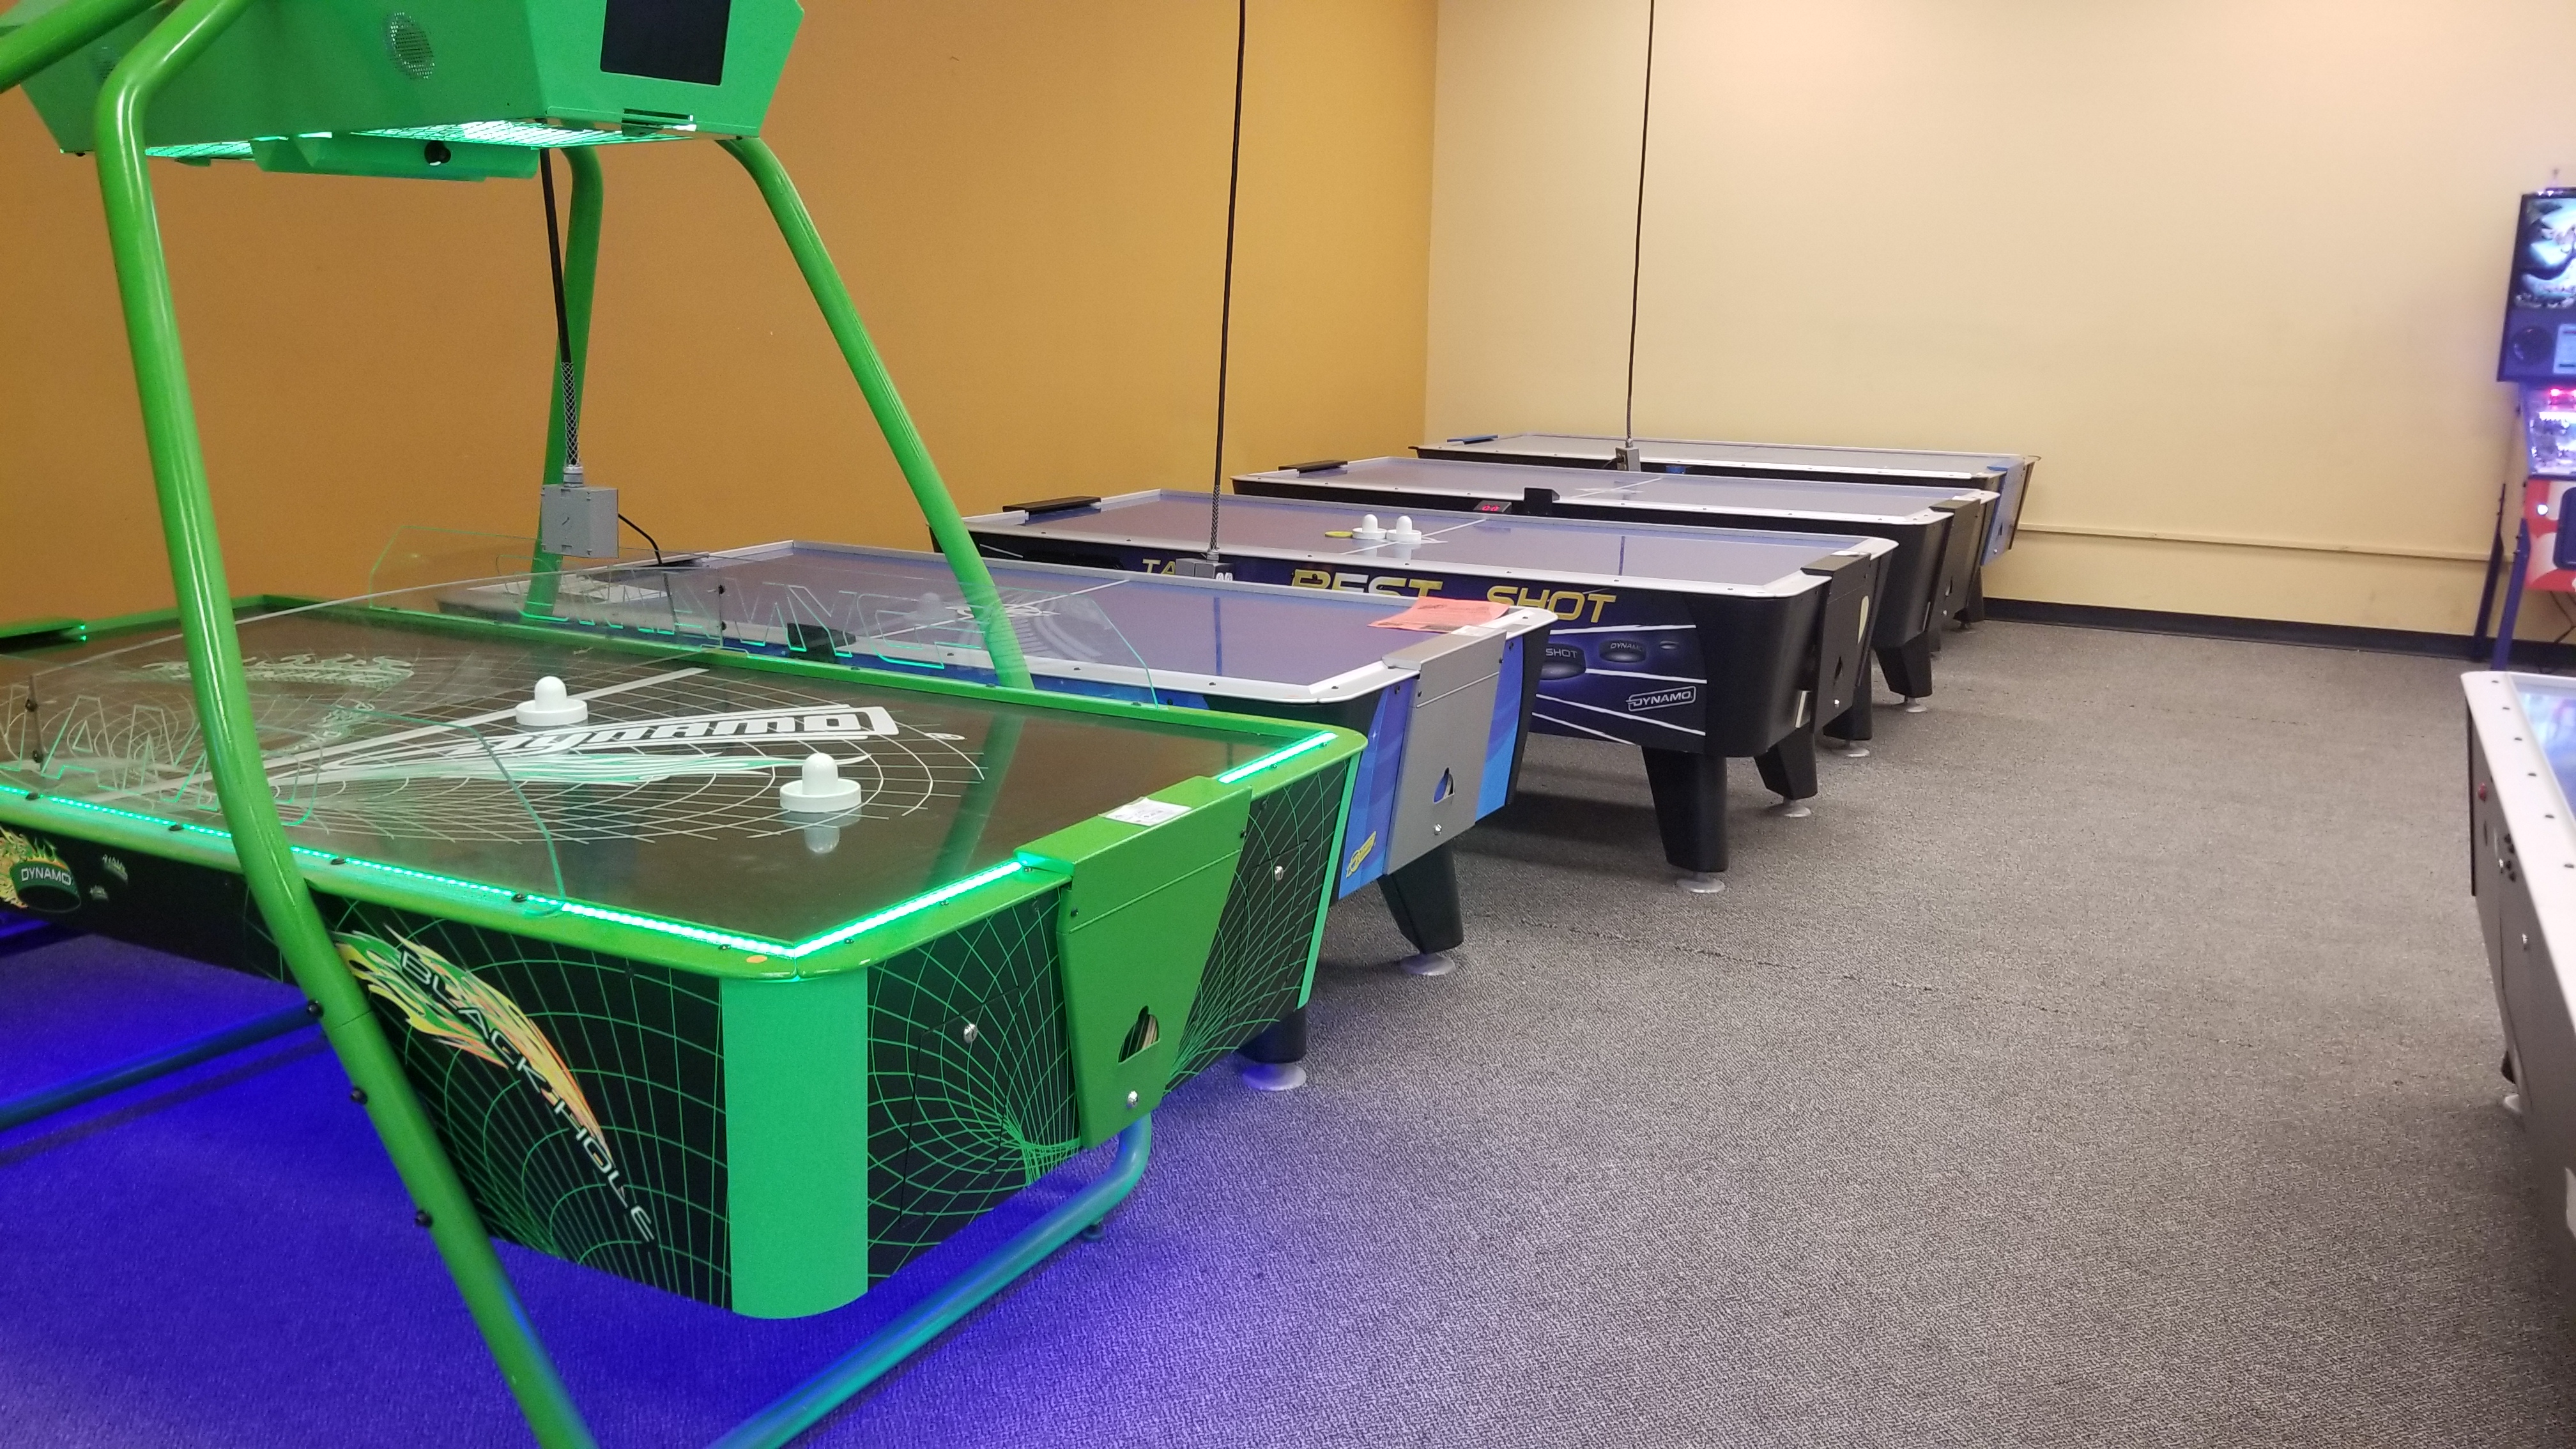 3 big reasons to buy an air hockey table for your home